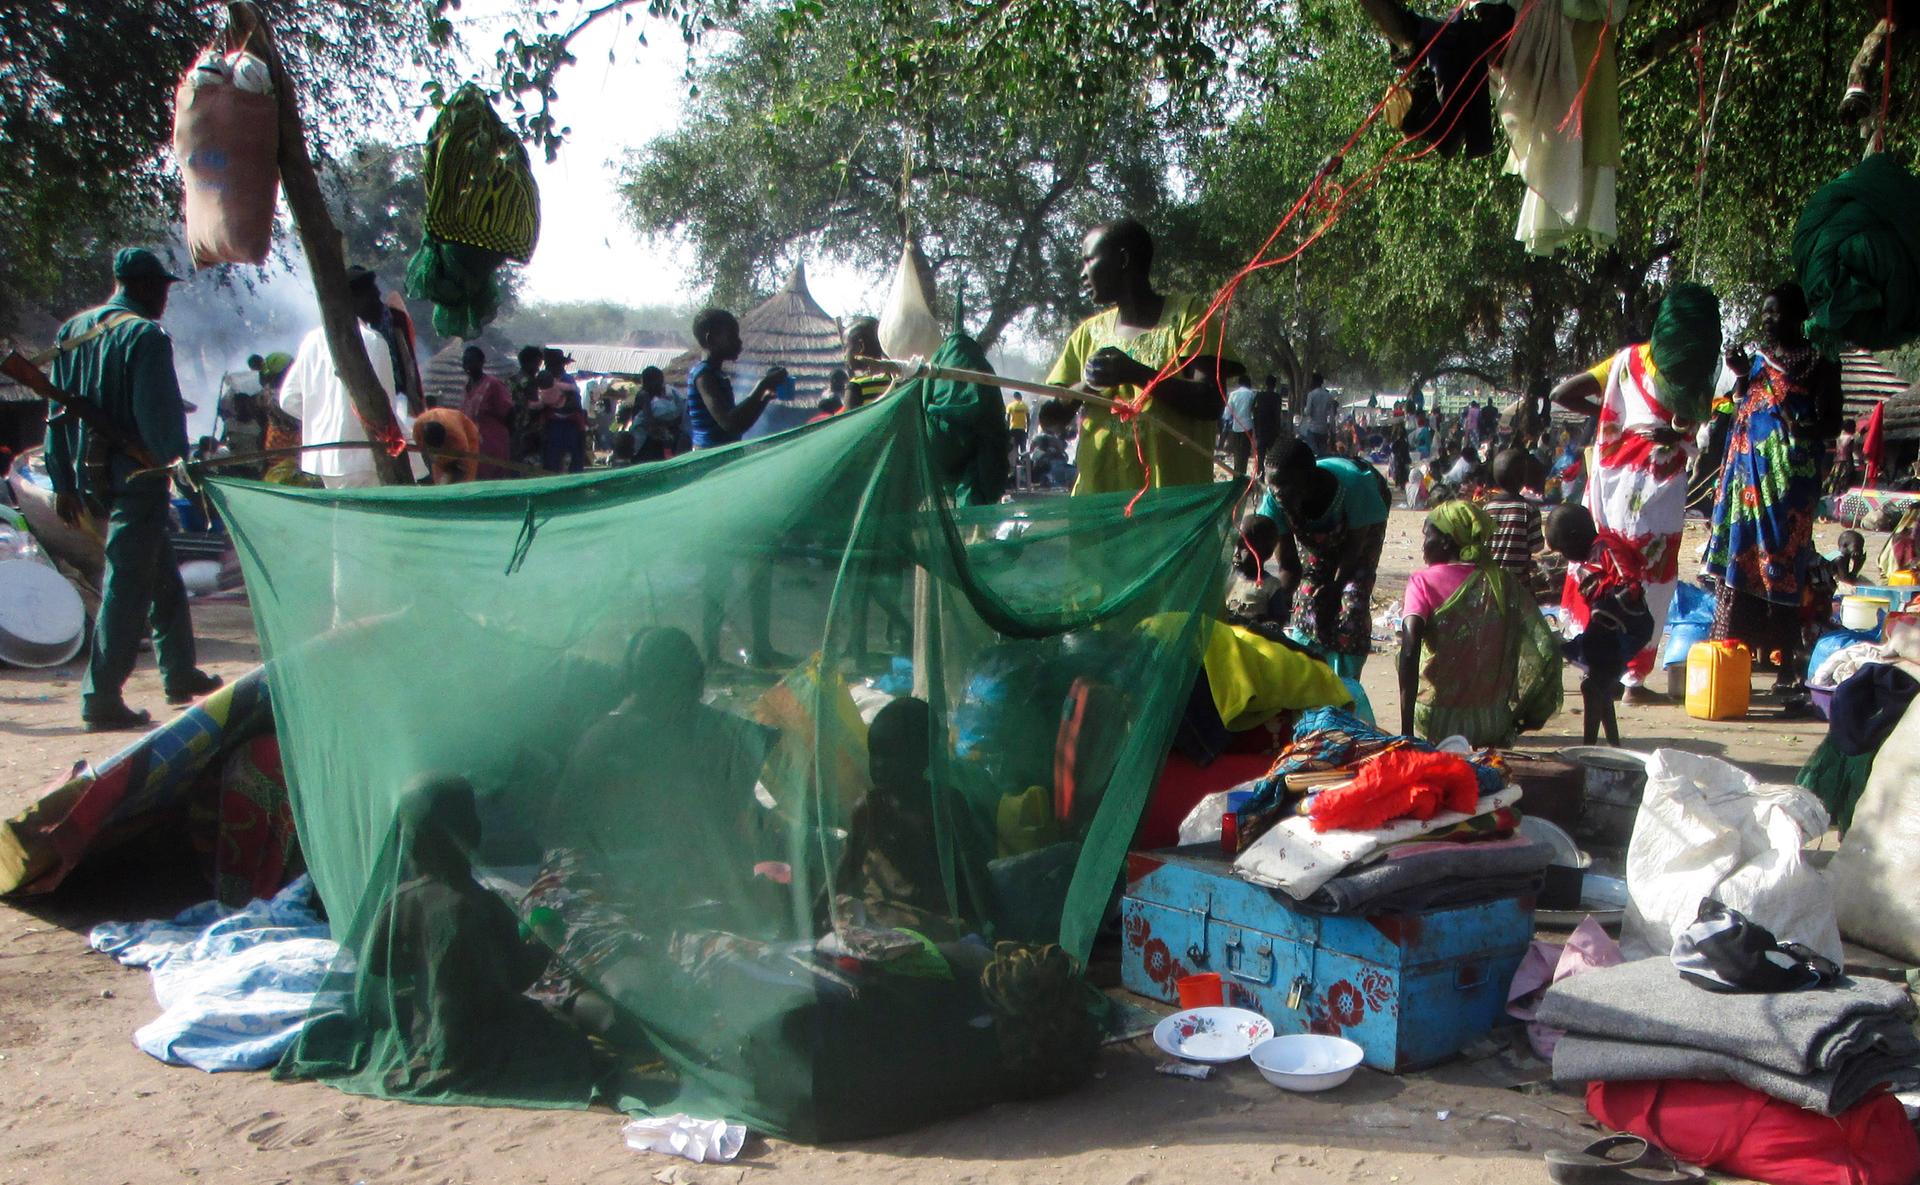 Displaced people gather inside a mosquito net tent as they flee from fighting between the South Sudanese army and rebels in Bor.